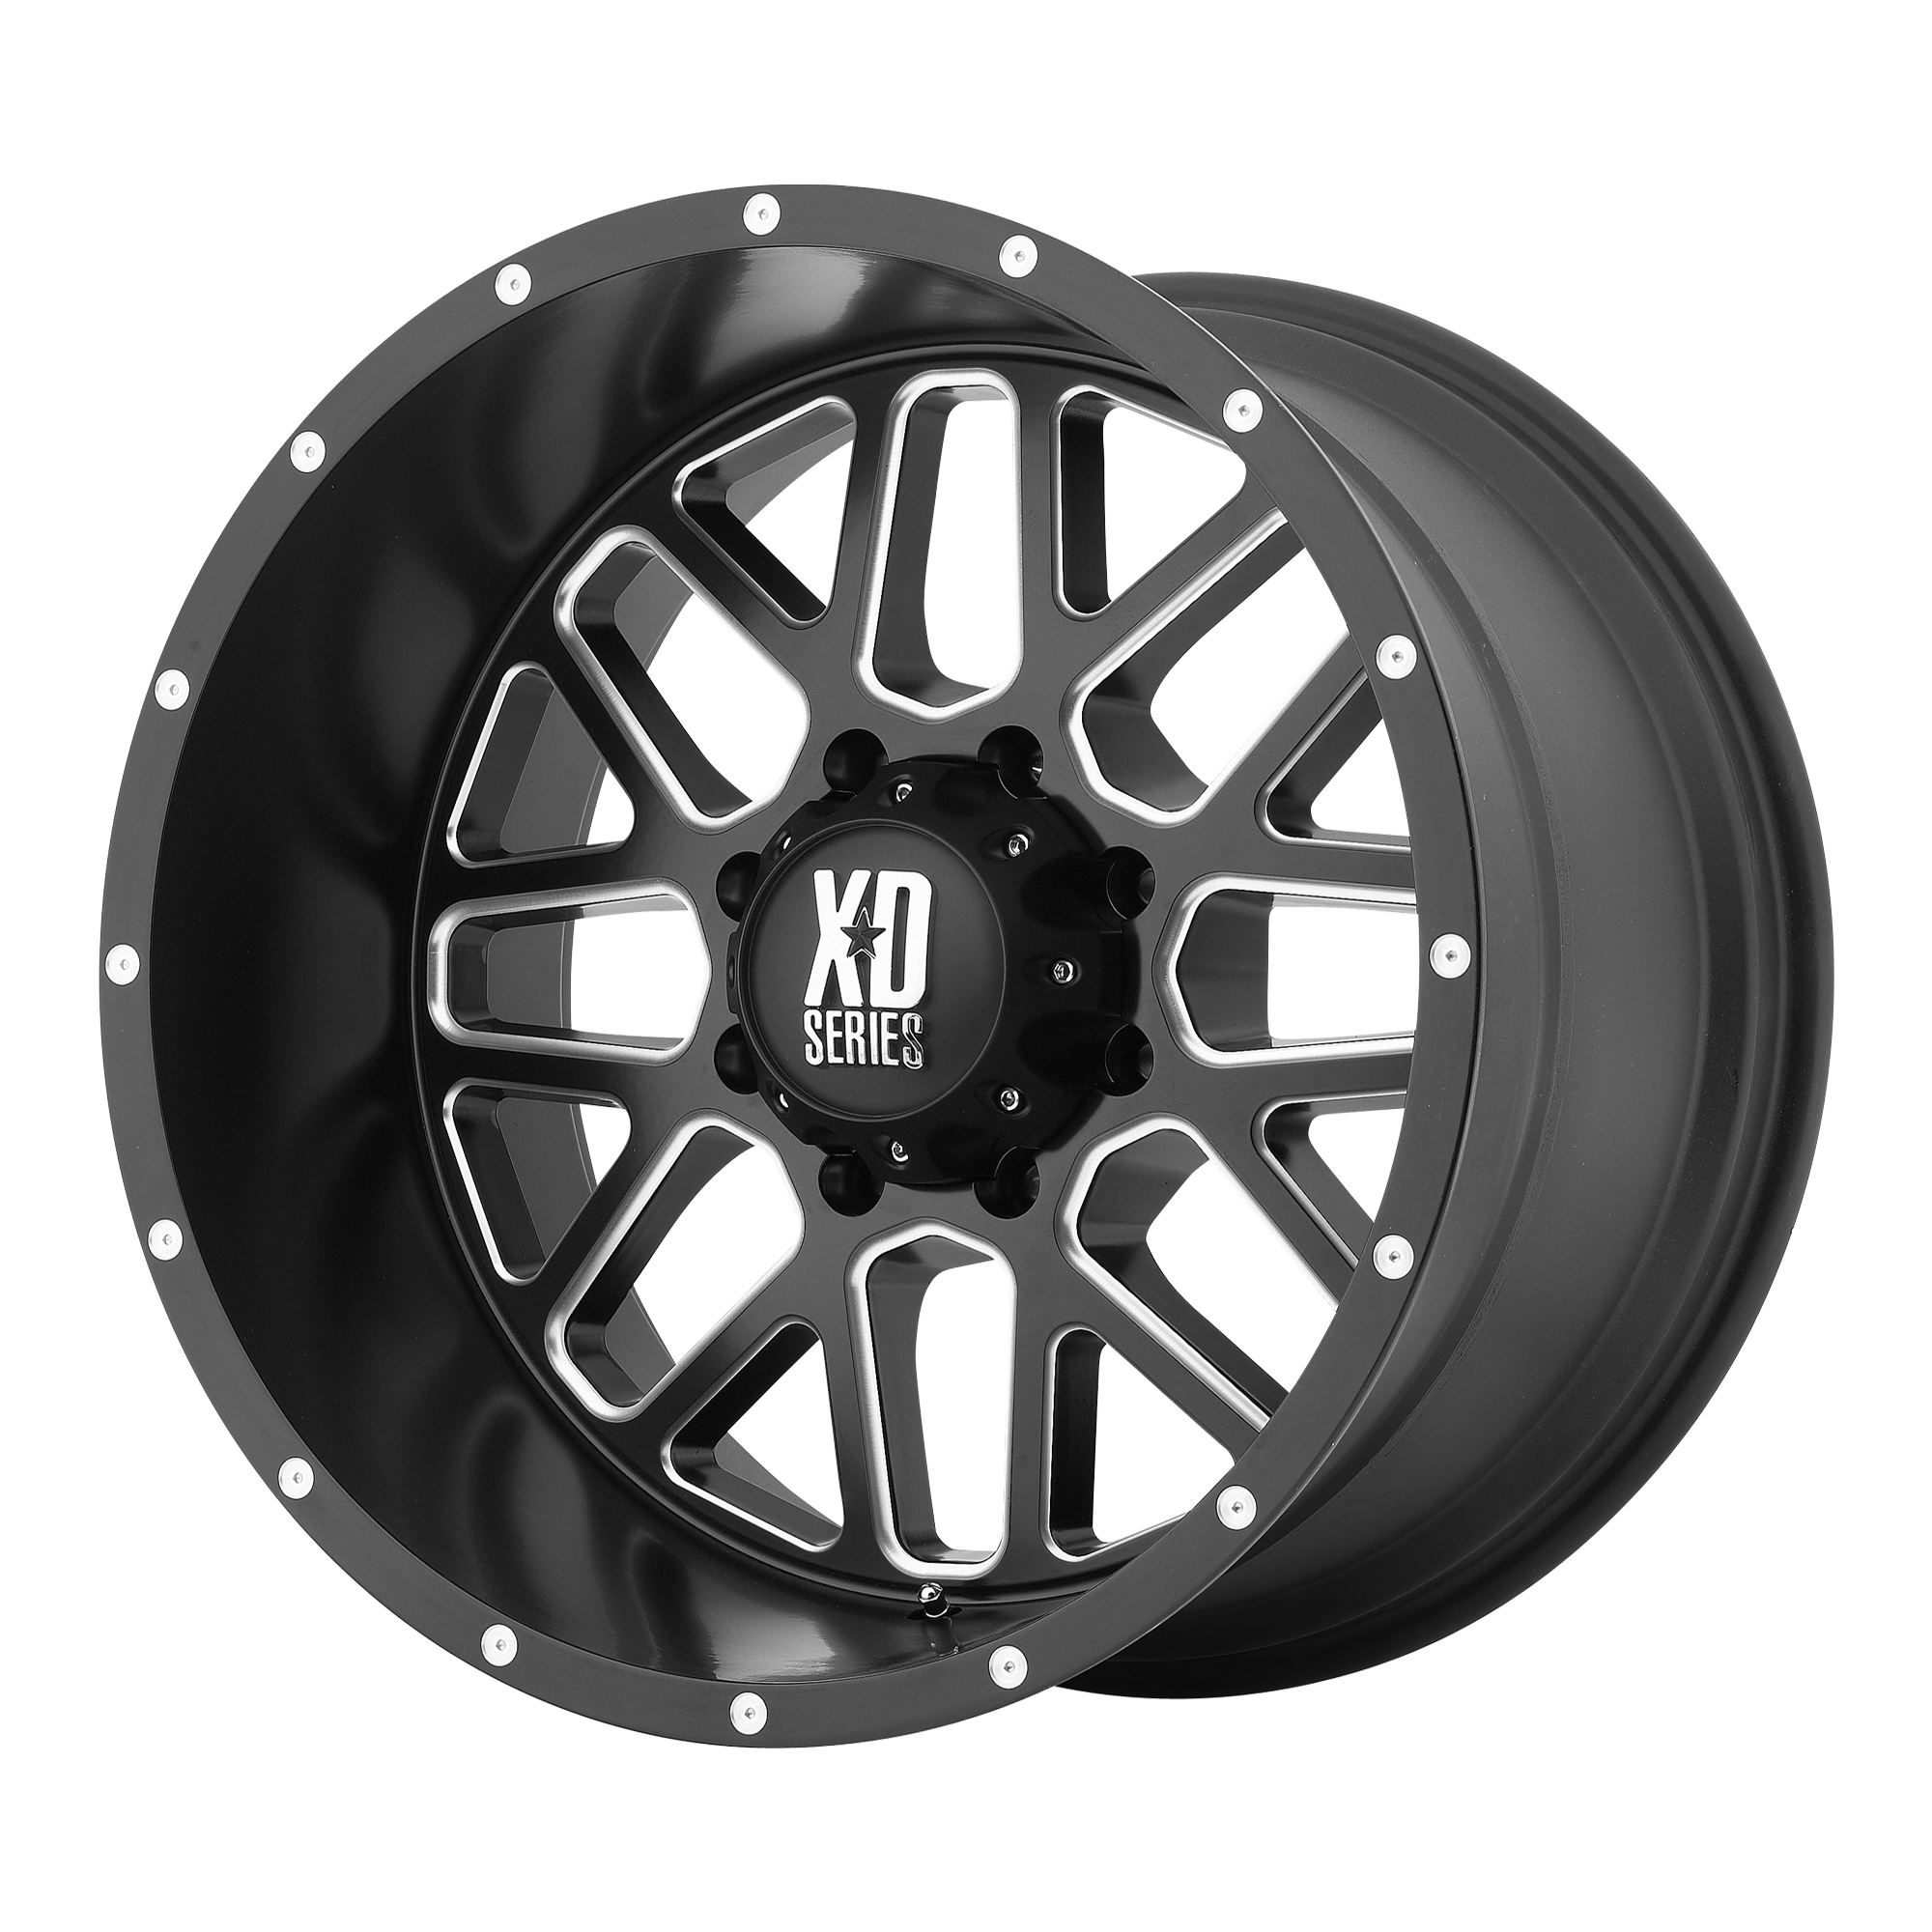 GRENADE 17x8.5 6x139.70 SATIN BLACK MILLED (0 mm) - Tires and Engine Performance